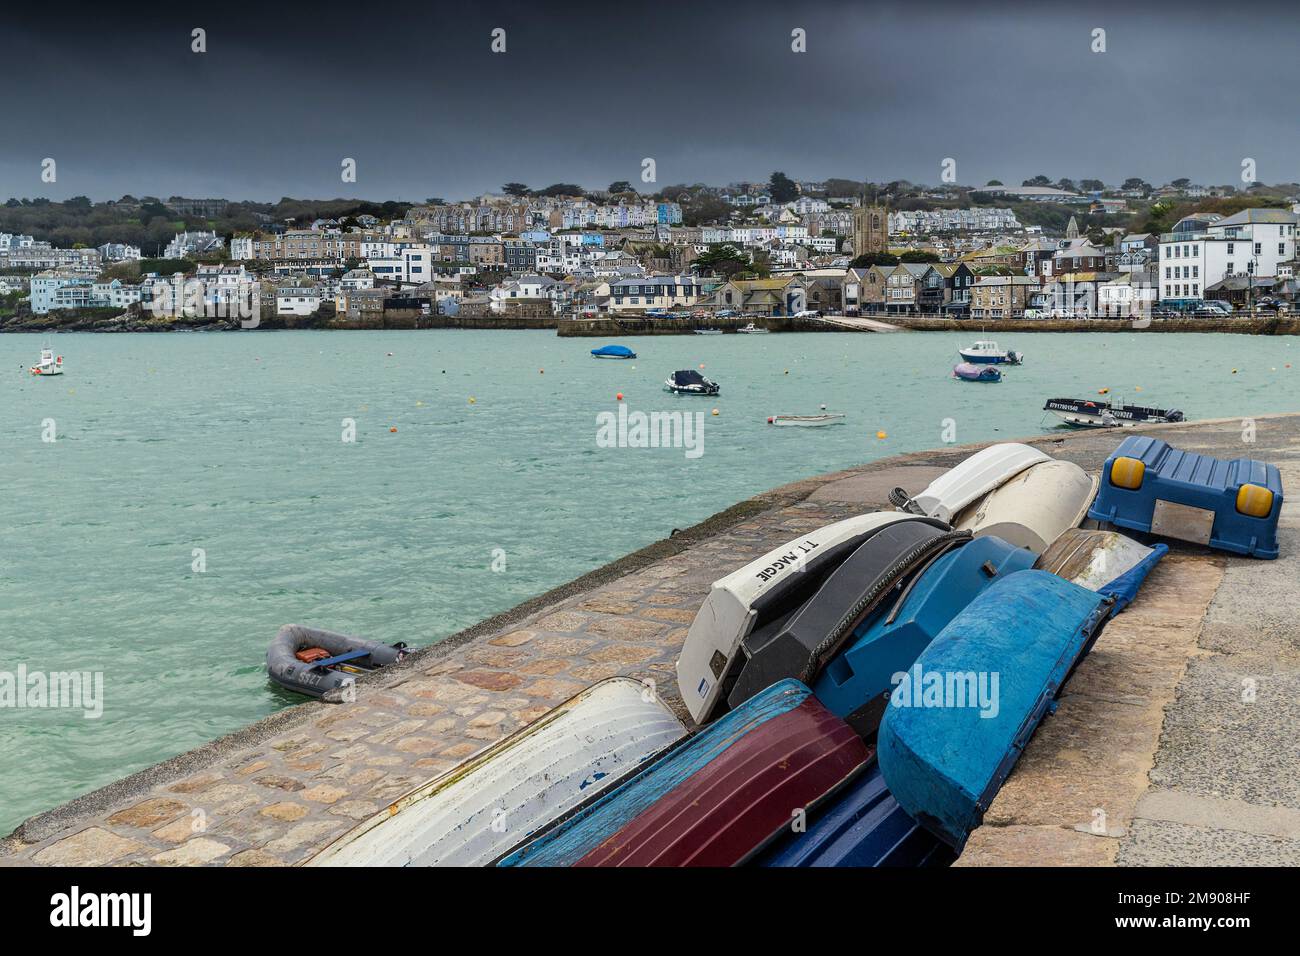 UK weather.; A rainy chilly miserable day in the historic seaside town of St Ives in Cornwall in England in the UK. Stock Photo